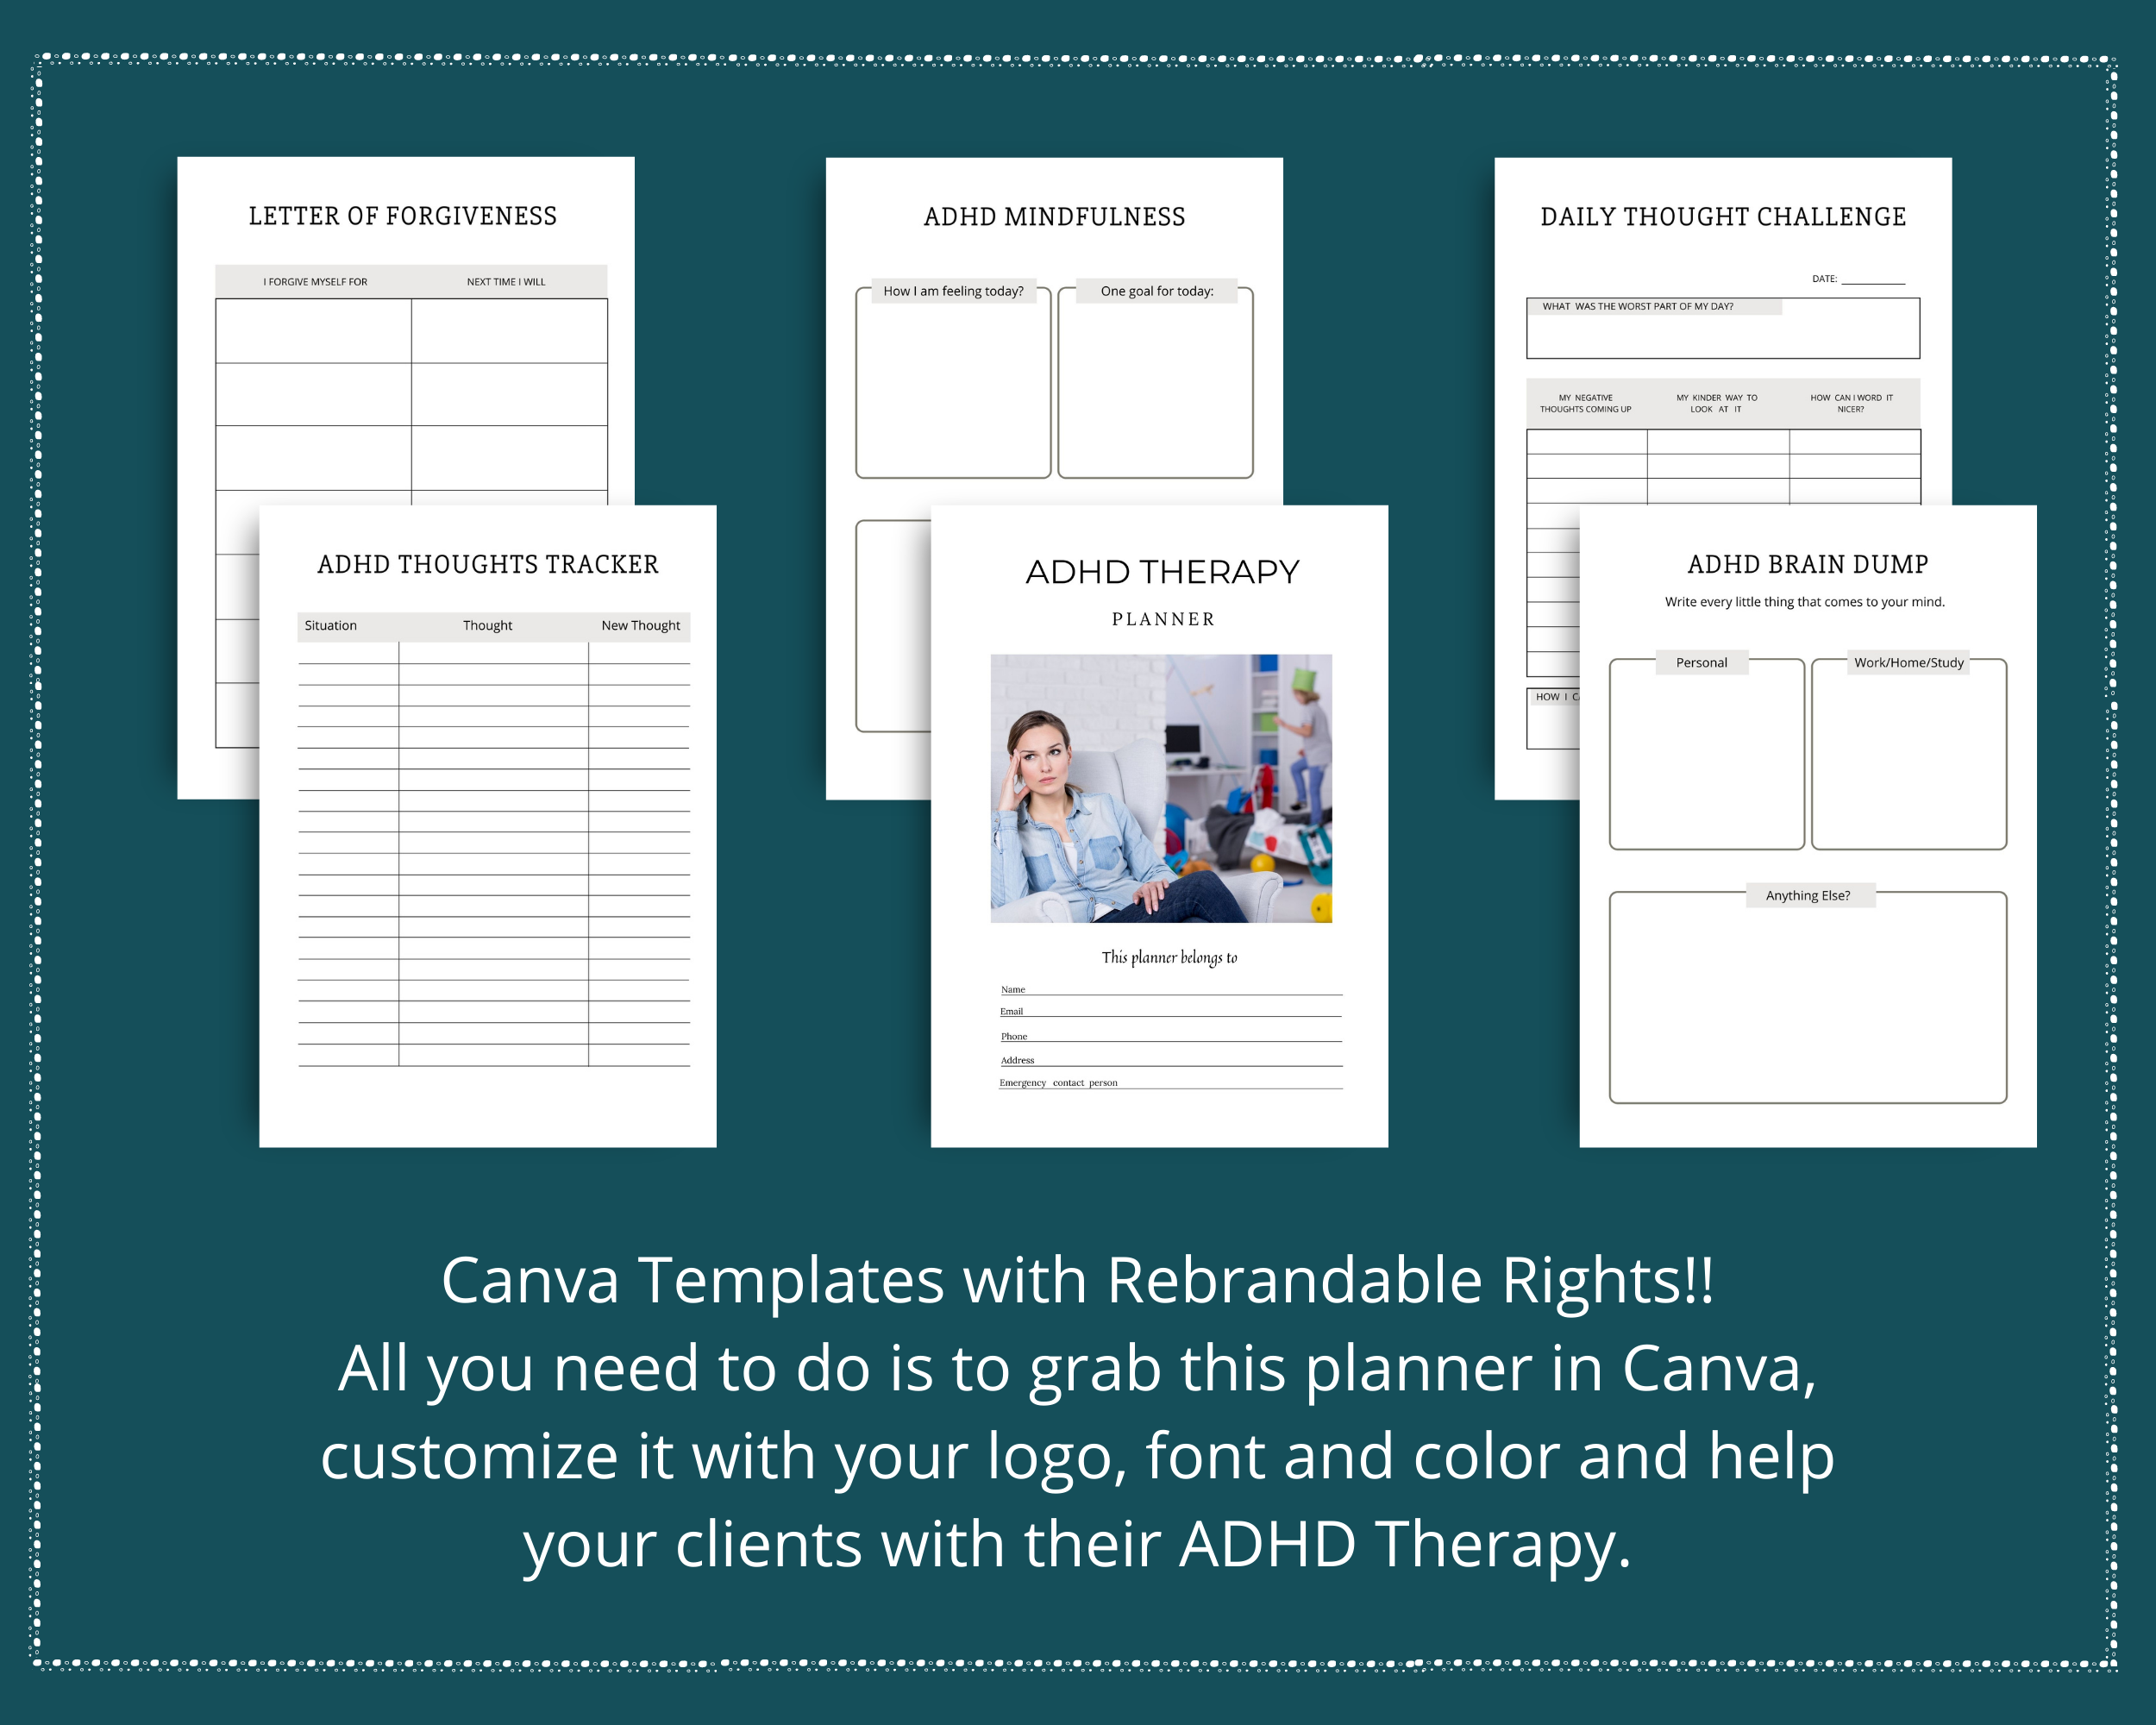 Editable ADHD Therapy Planner in Canva | Commercial Use